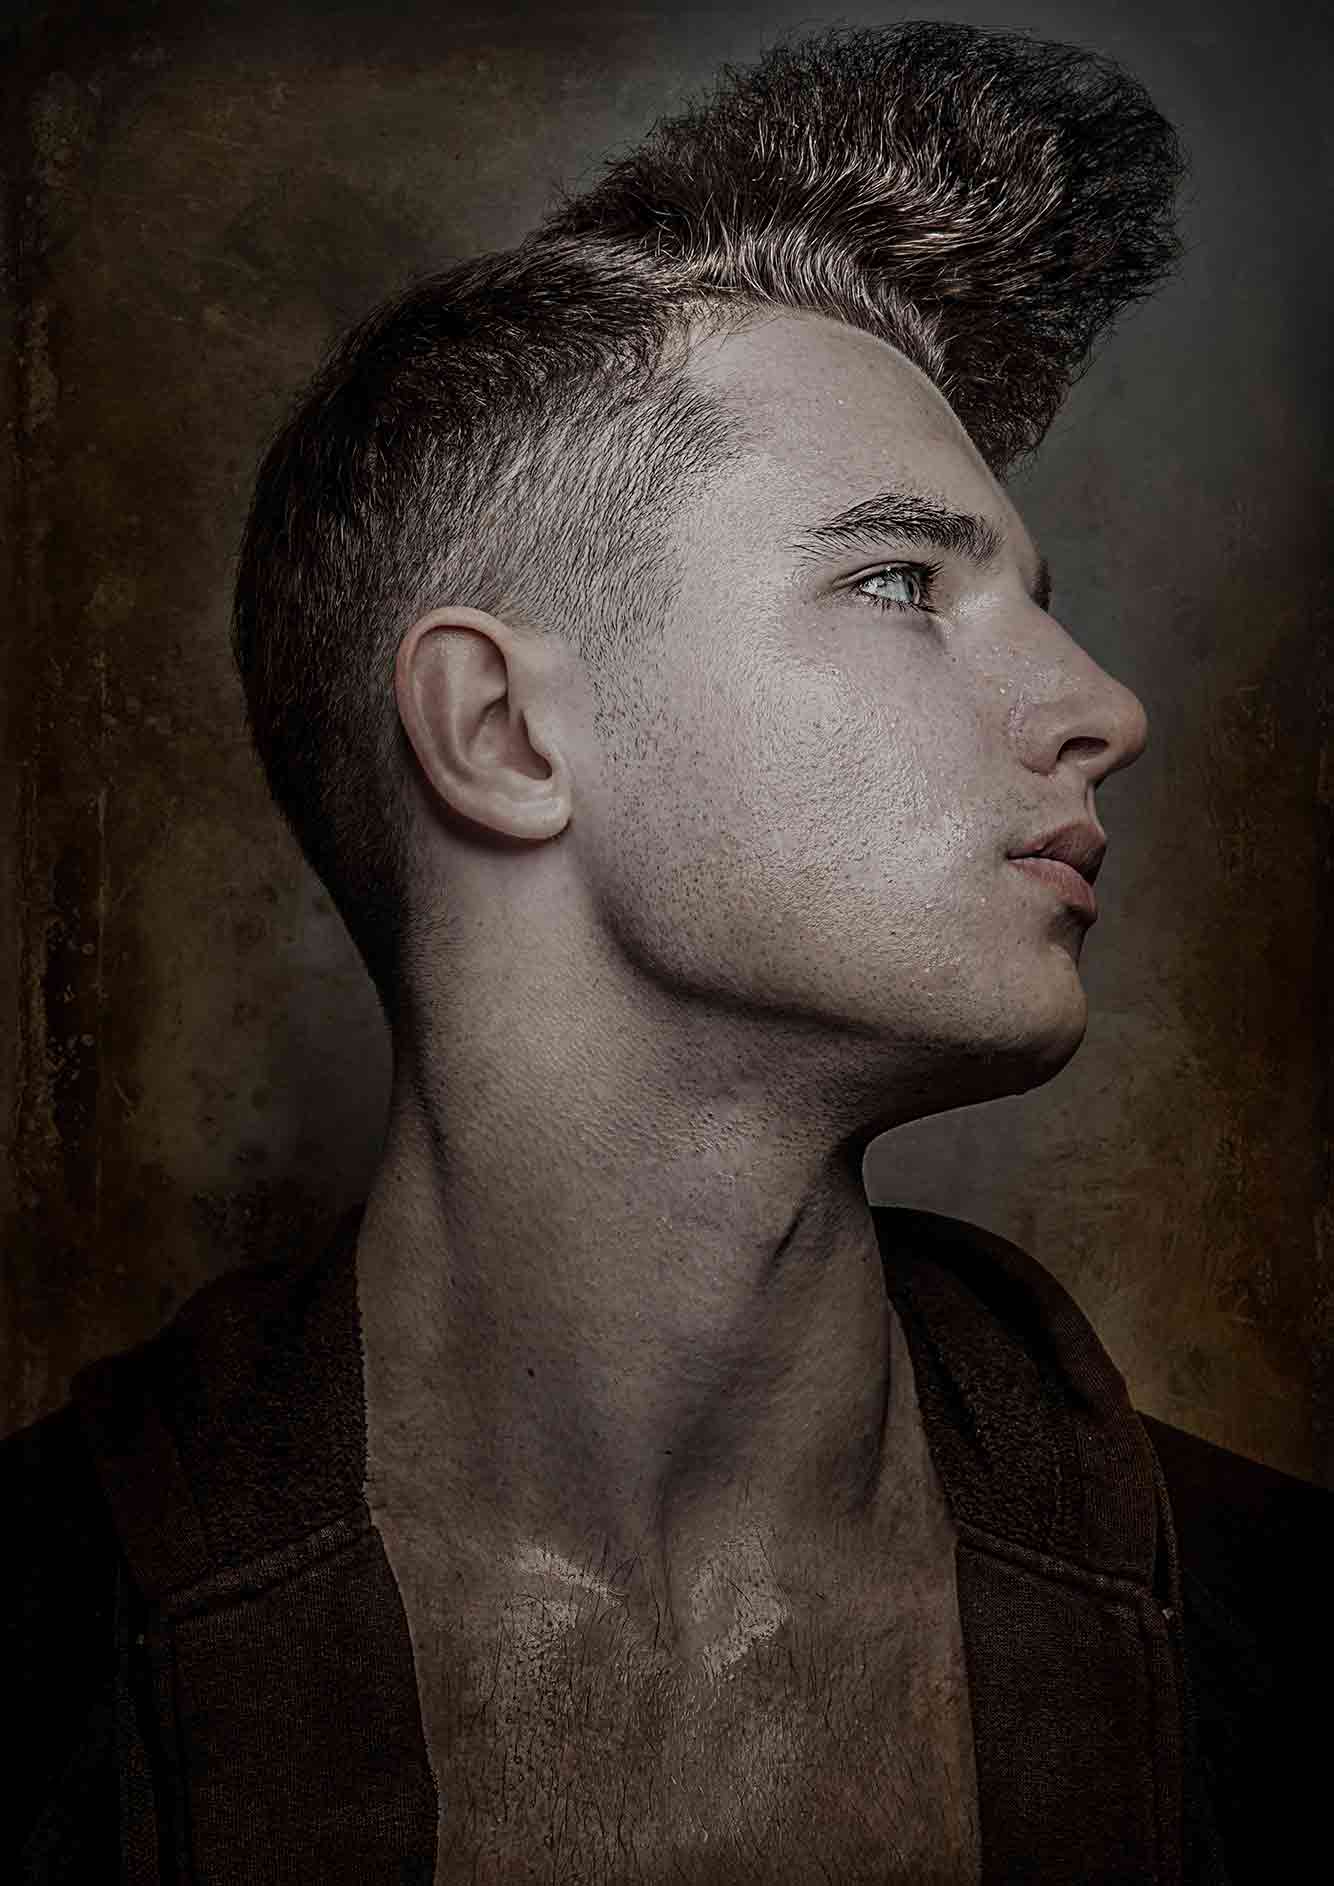 Male-with-undercut perm-hairstyle